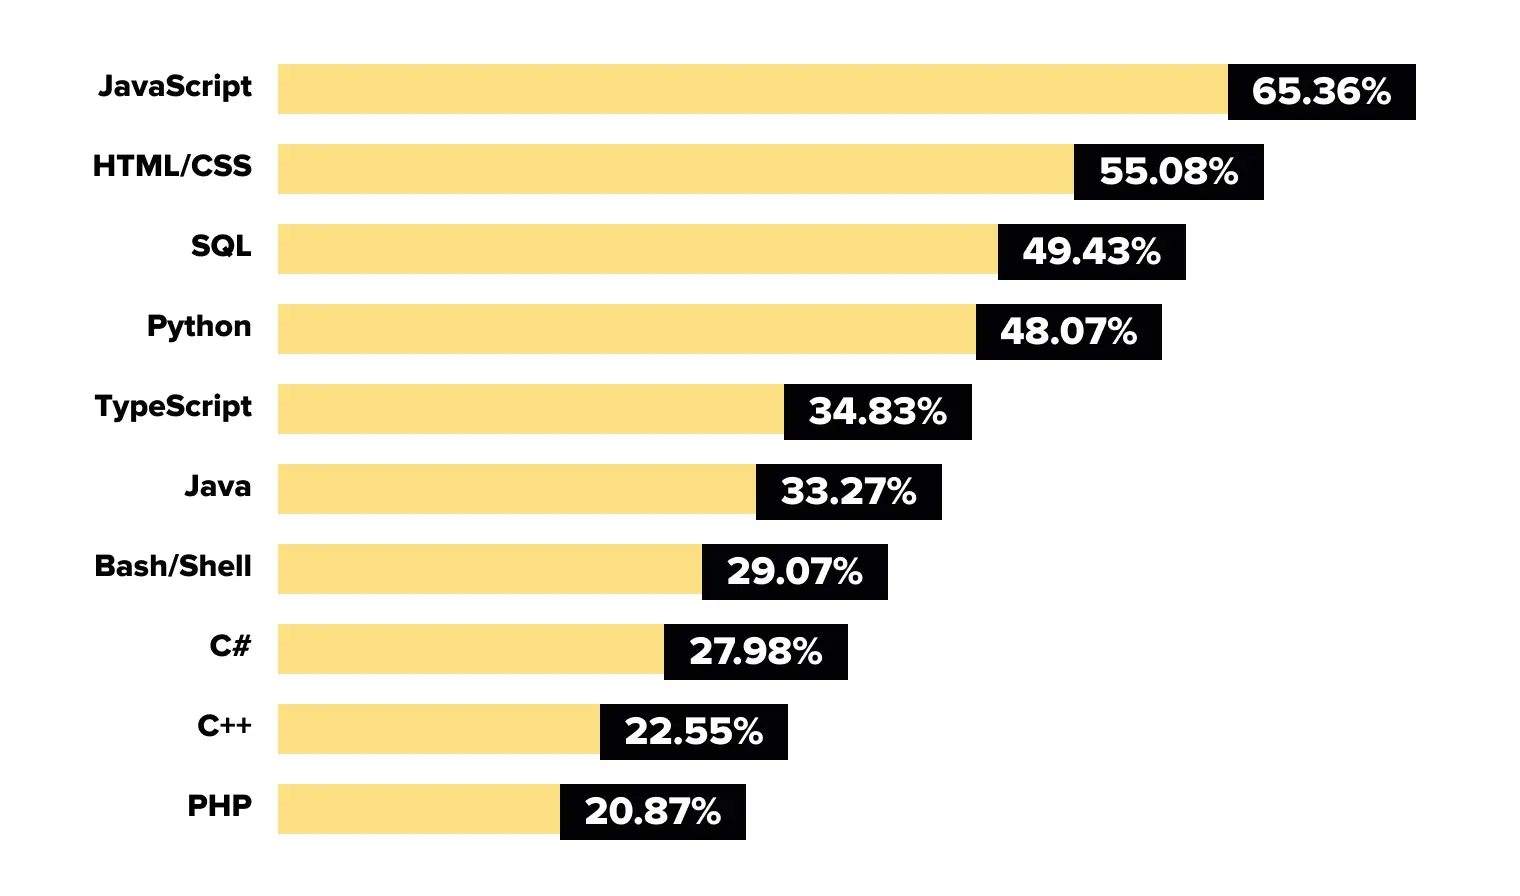 The most popular languages ​​for developing the back-end of web products